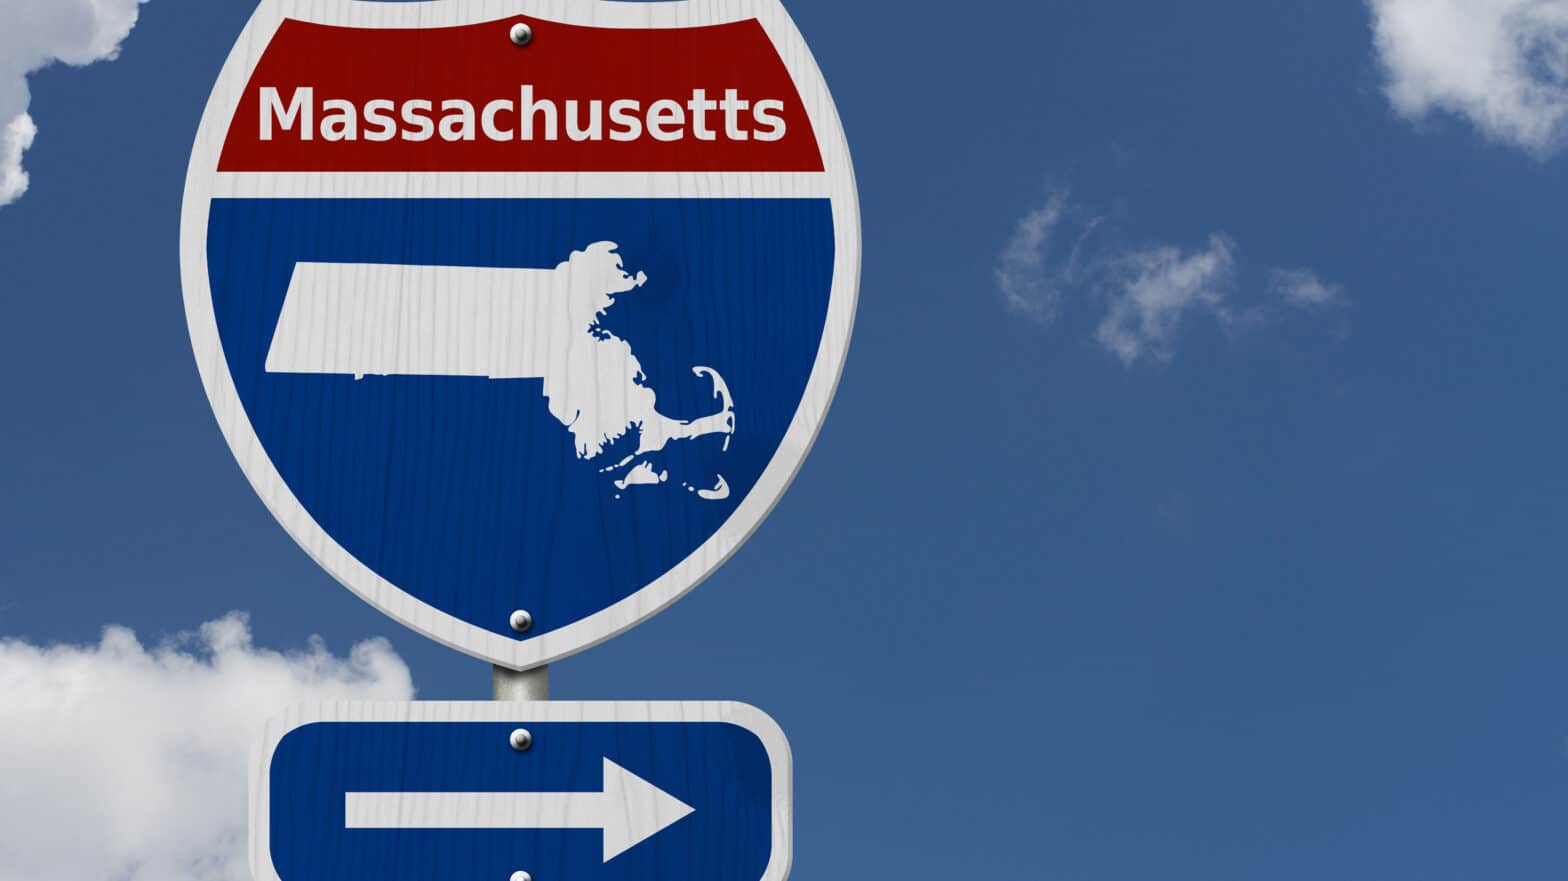 A sign that reads "Massachusetts" with an outline of the state and an arrow pointing to the right - Should I Travel To Massachusetts For Drug Rehab